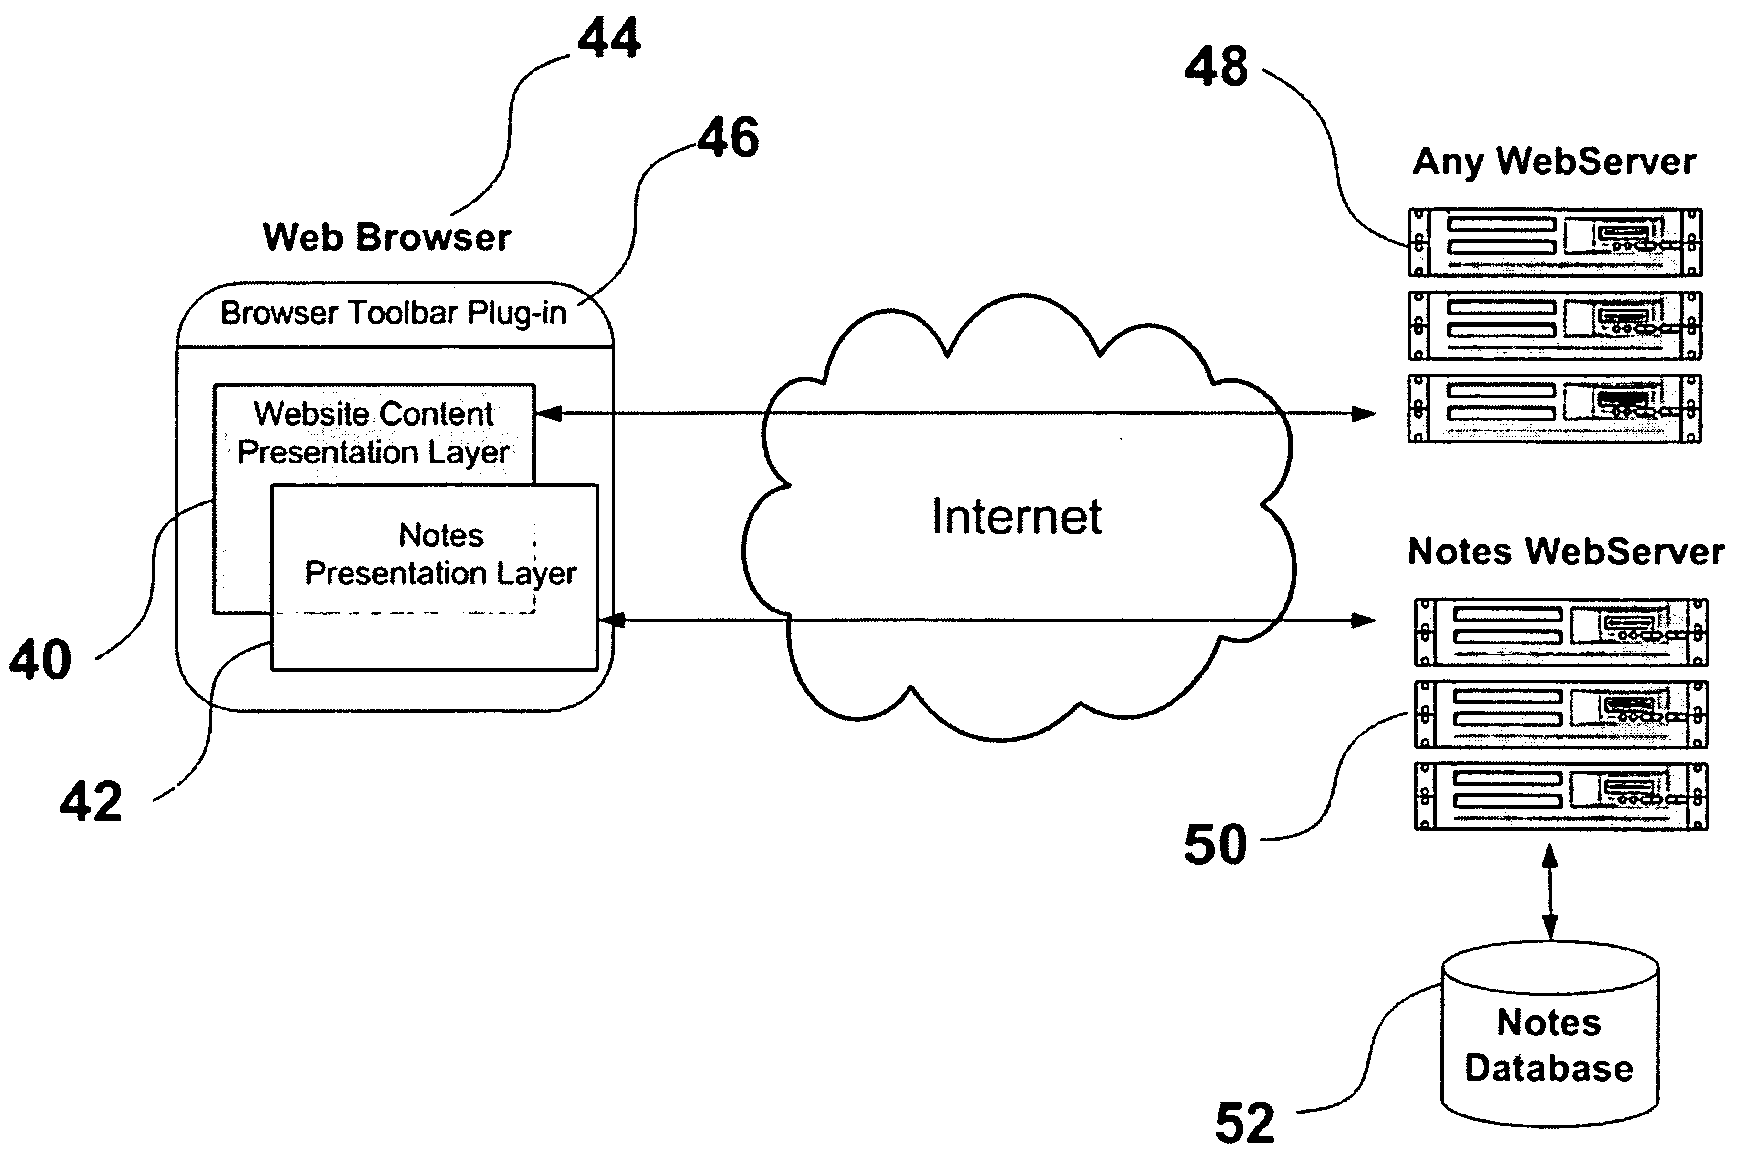 System and method to create, save, and display web annotations that are selectively shared within specified online communities